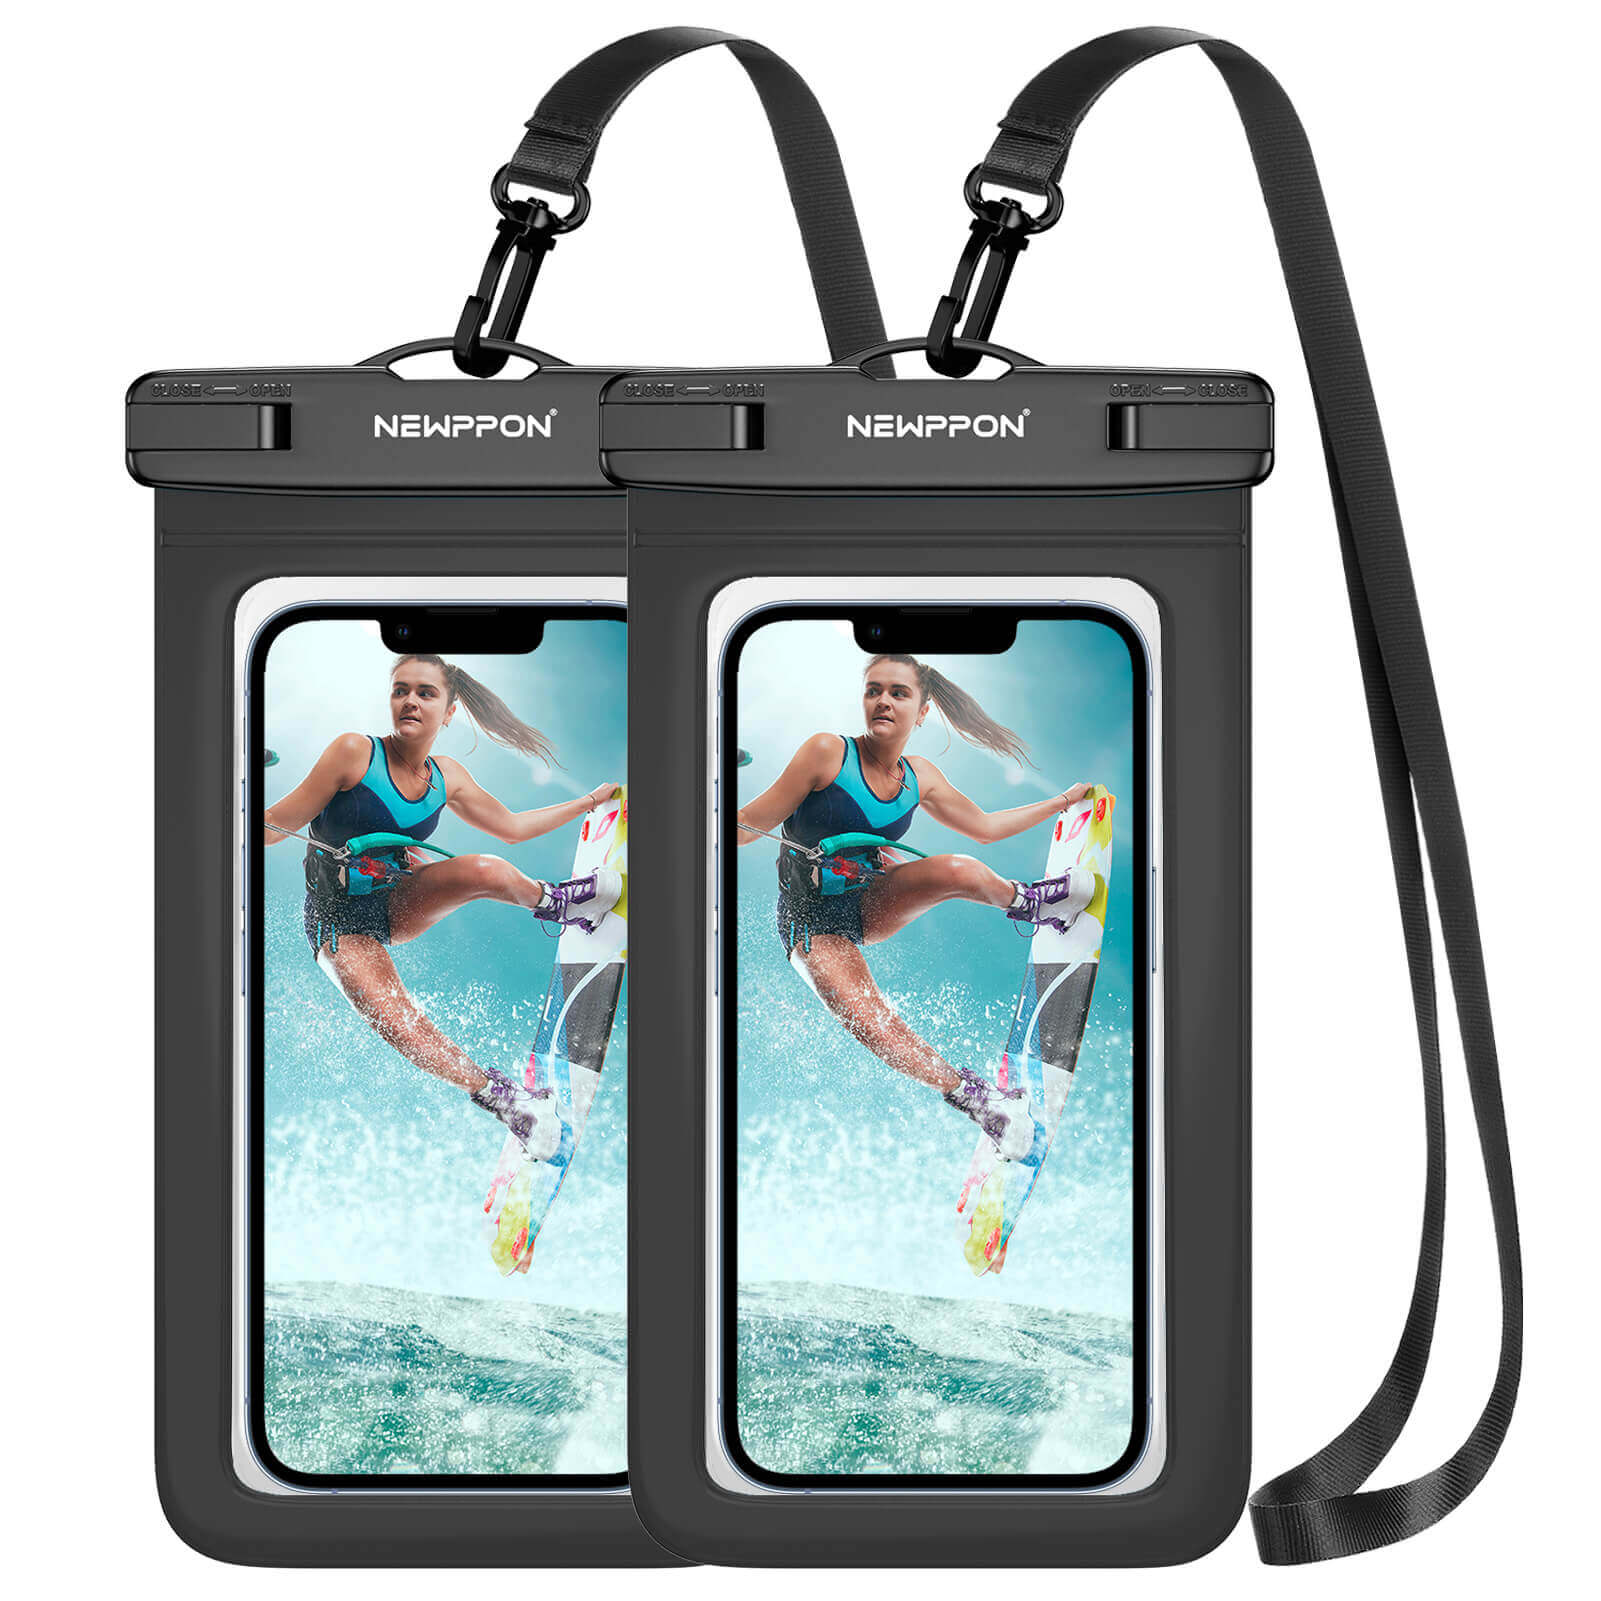 Waterproof Cell Phone Pouch Case : 2 Pack Floating Water Proof Dry Bag with Neck Lanyard - Underwater Universal Clear Cellphone Holder Large Protector for iPhone Samsung Galaxy for Beach Pool Swimming